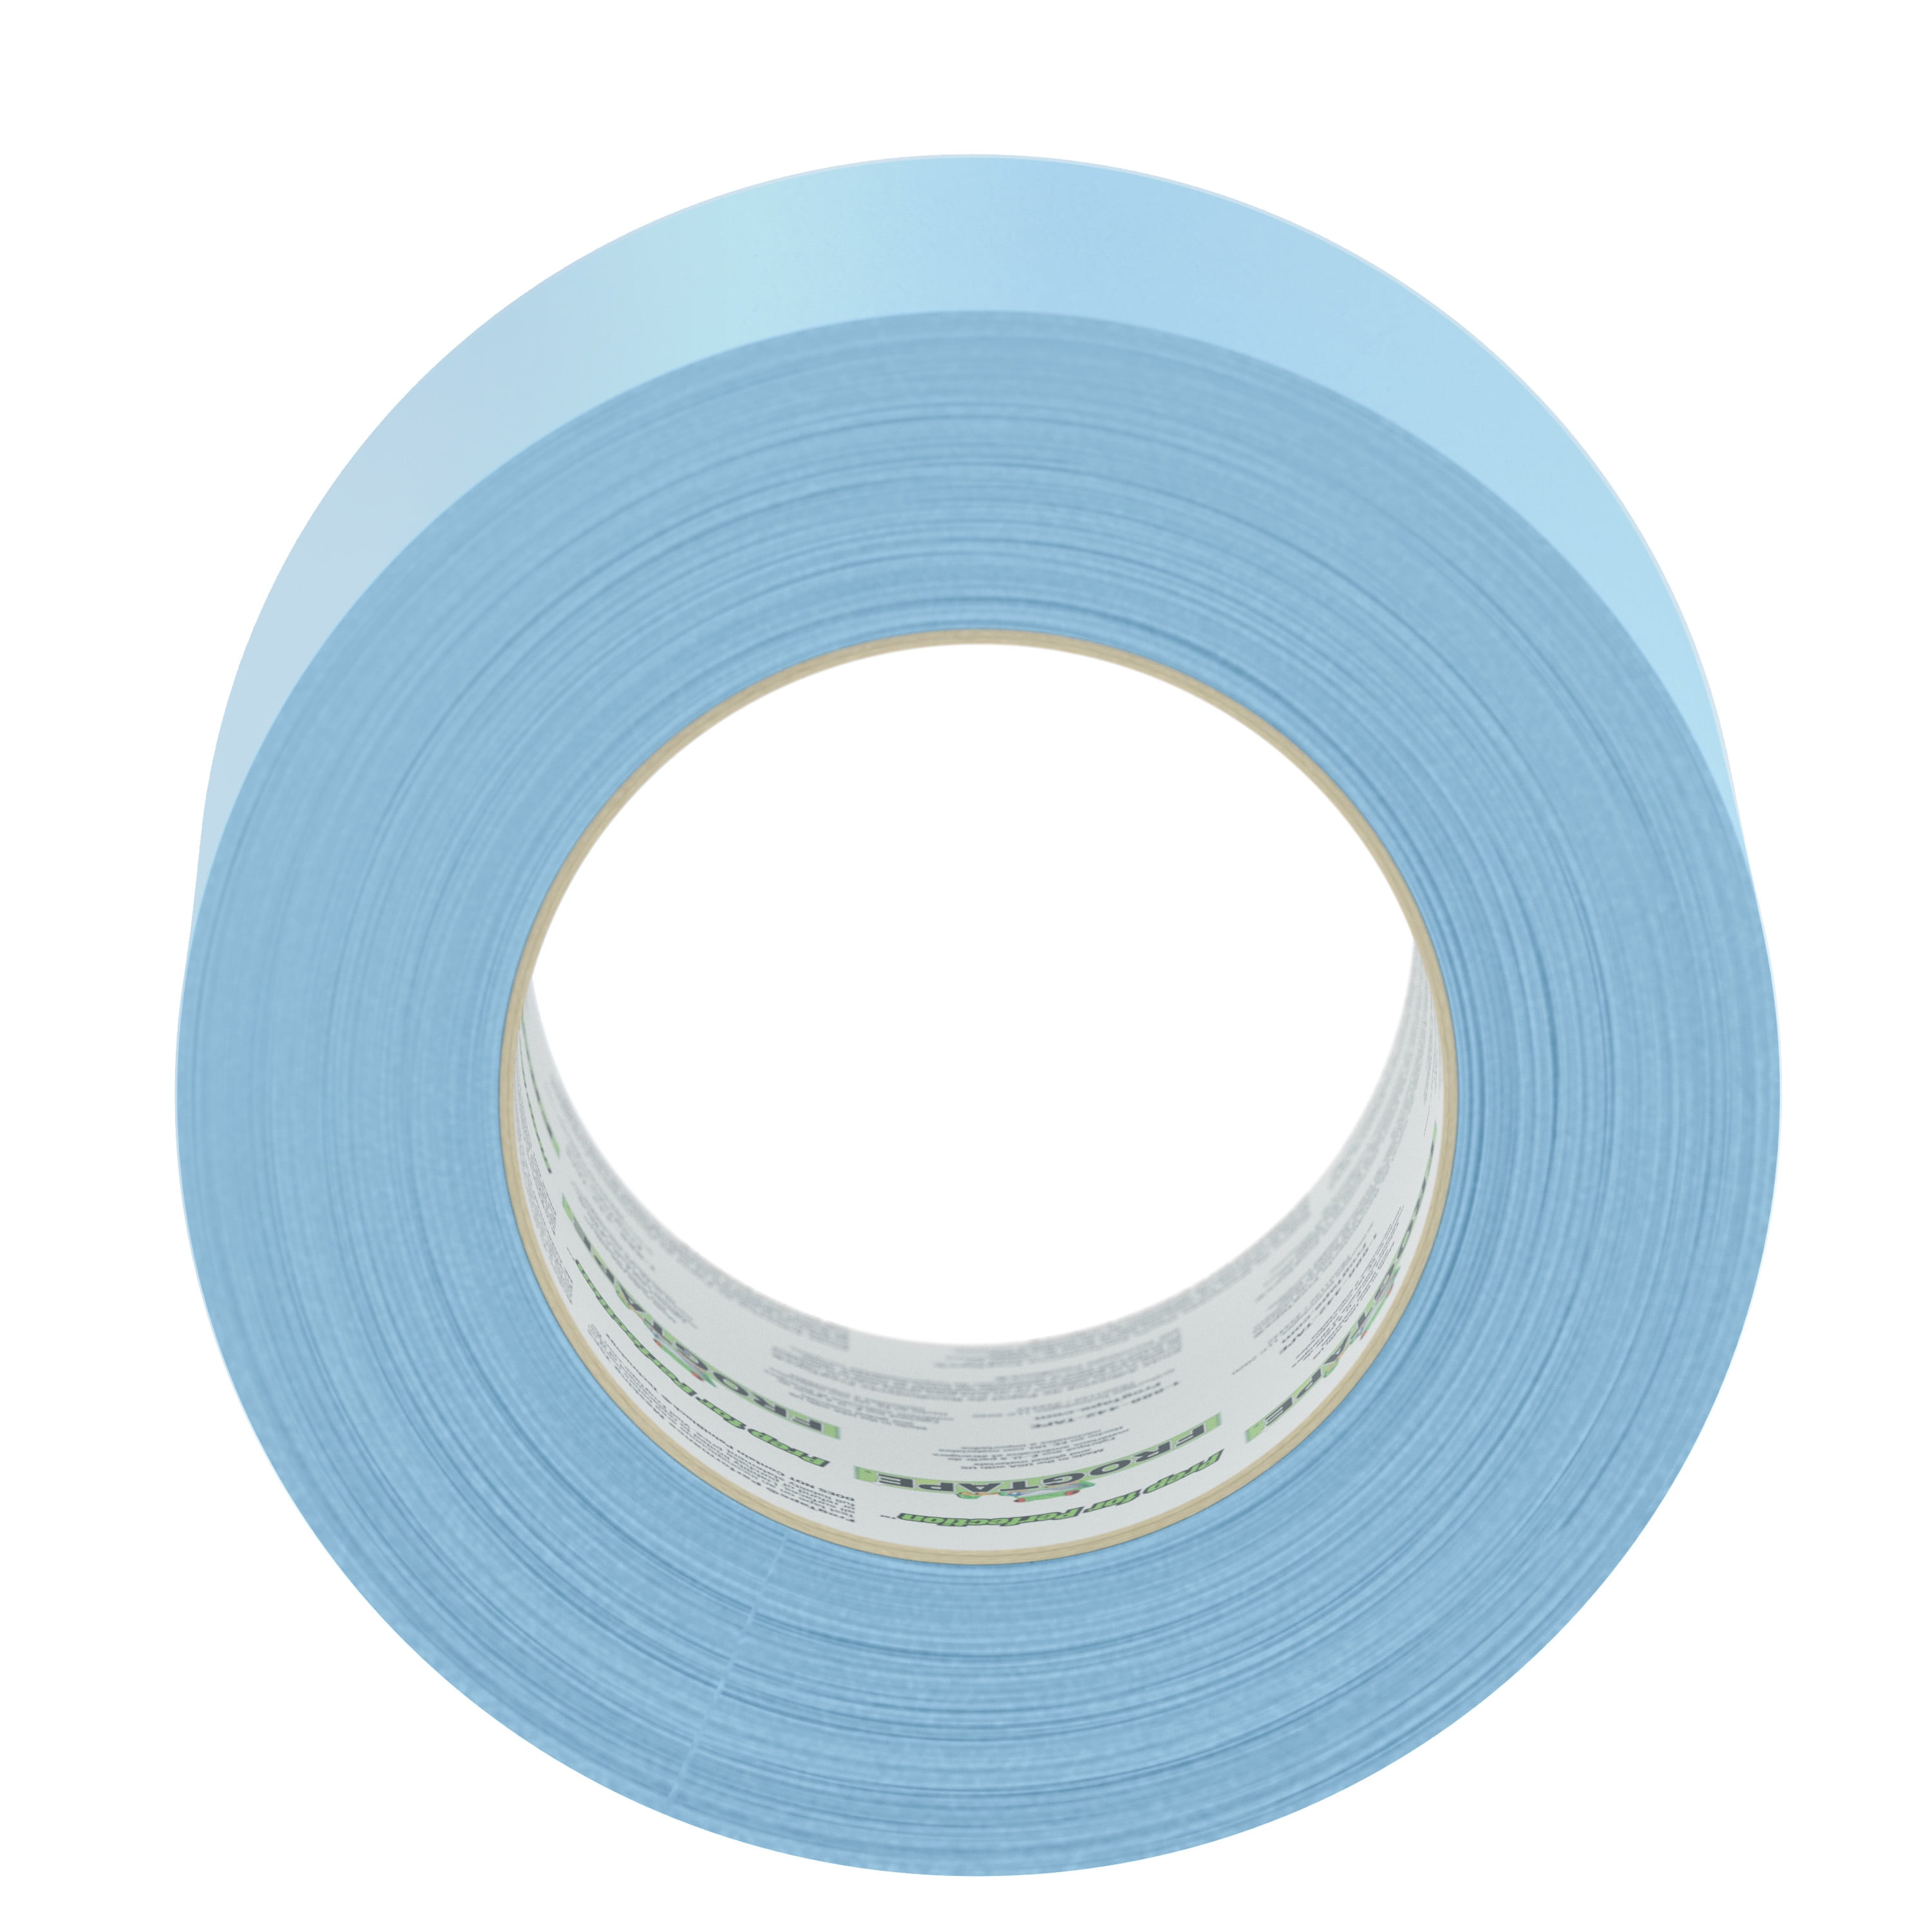 FrogTape® 250 Light Blue 2.83 in. x 60 yd. Moderate Temperature Performance  Masking Tape, Rolls